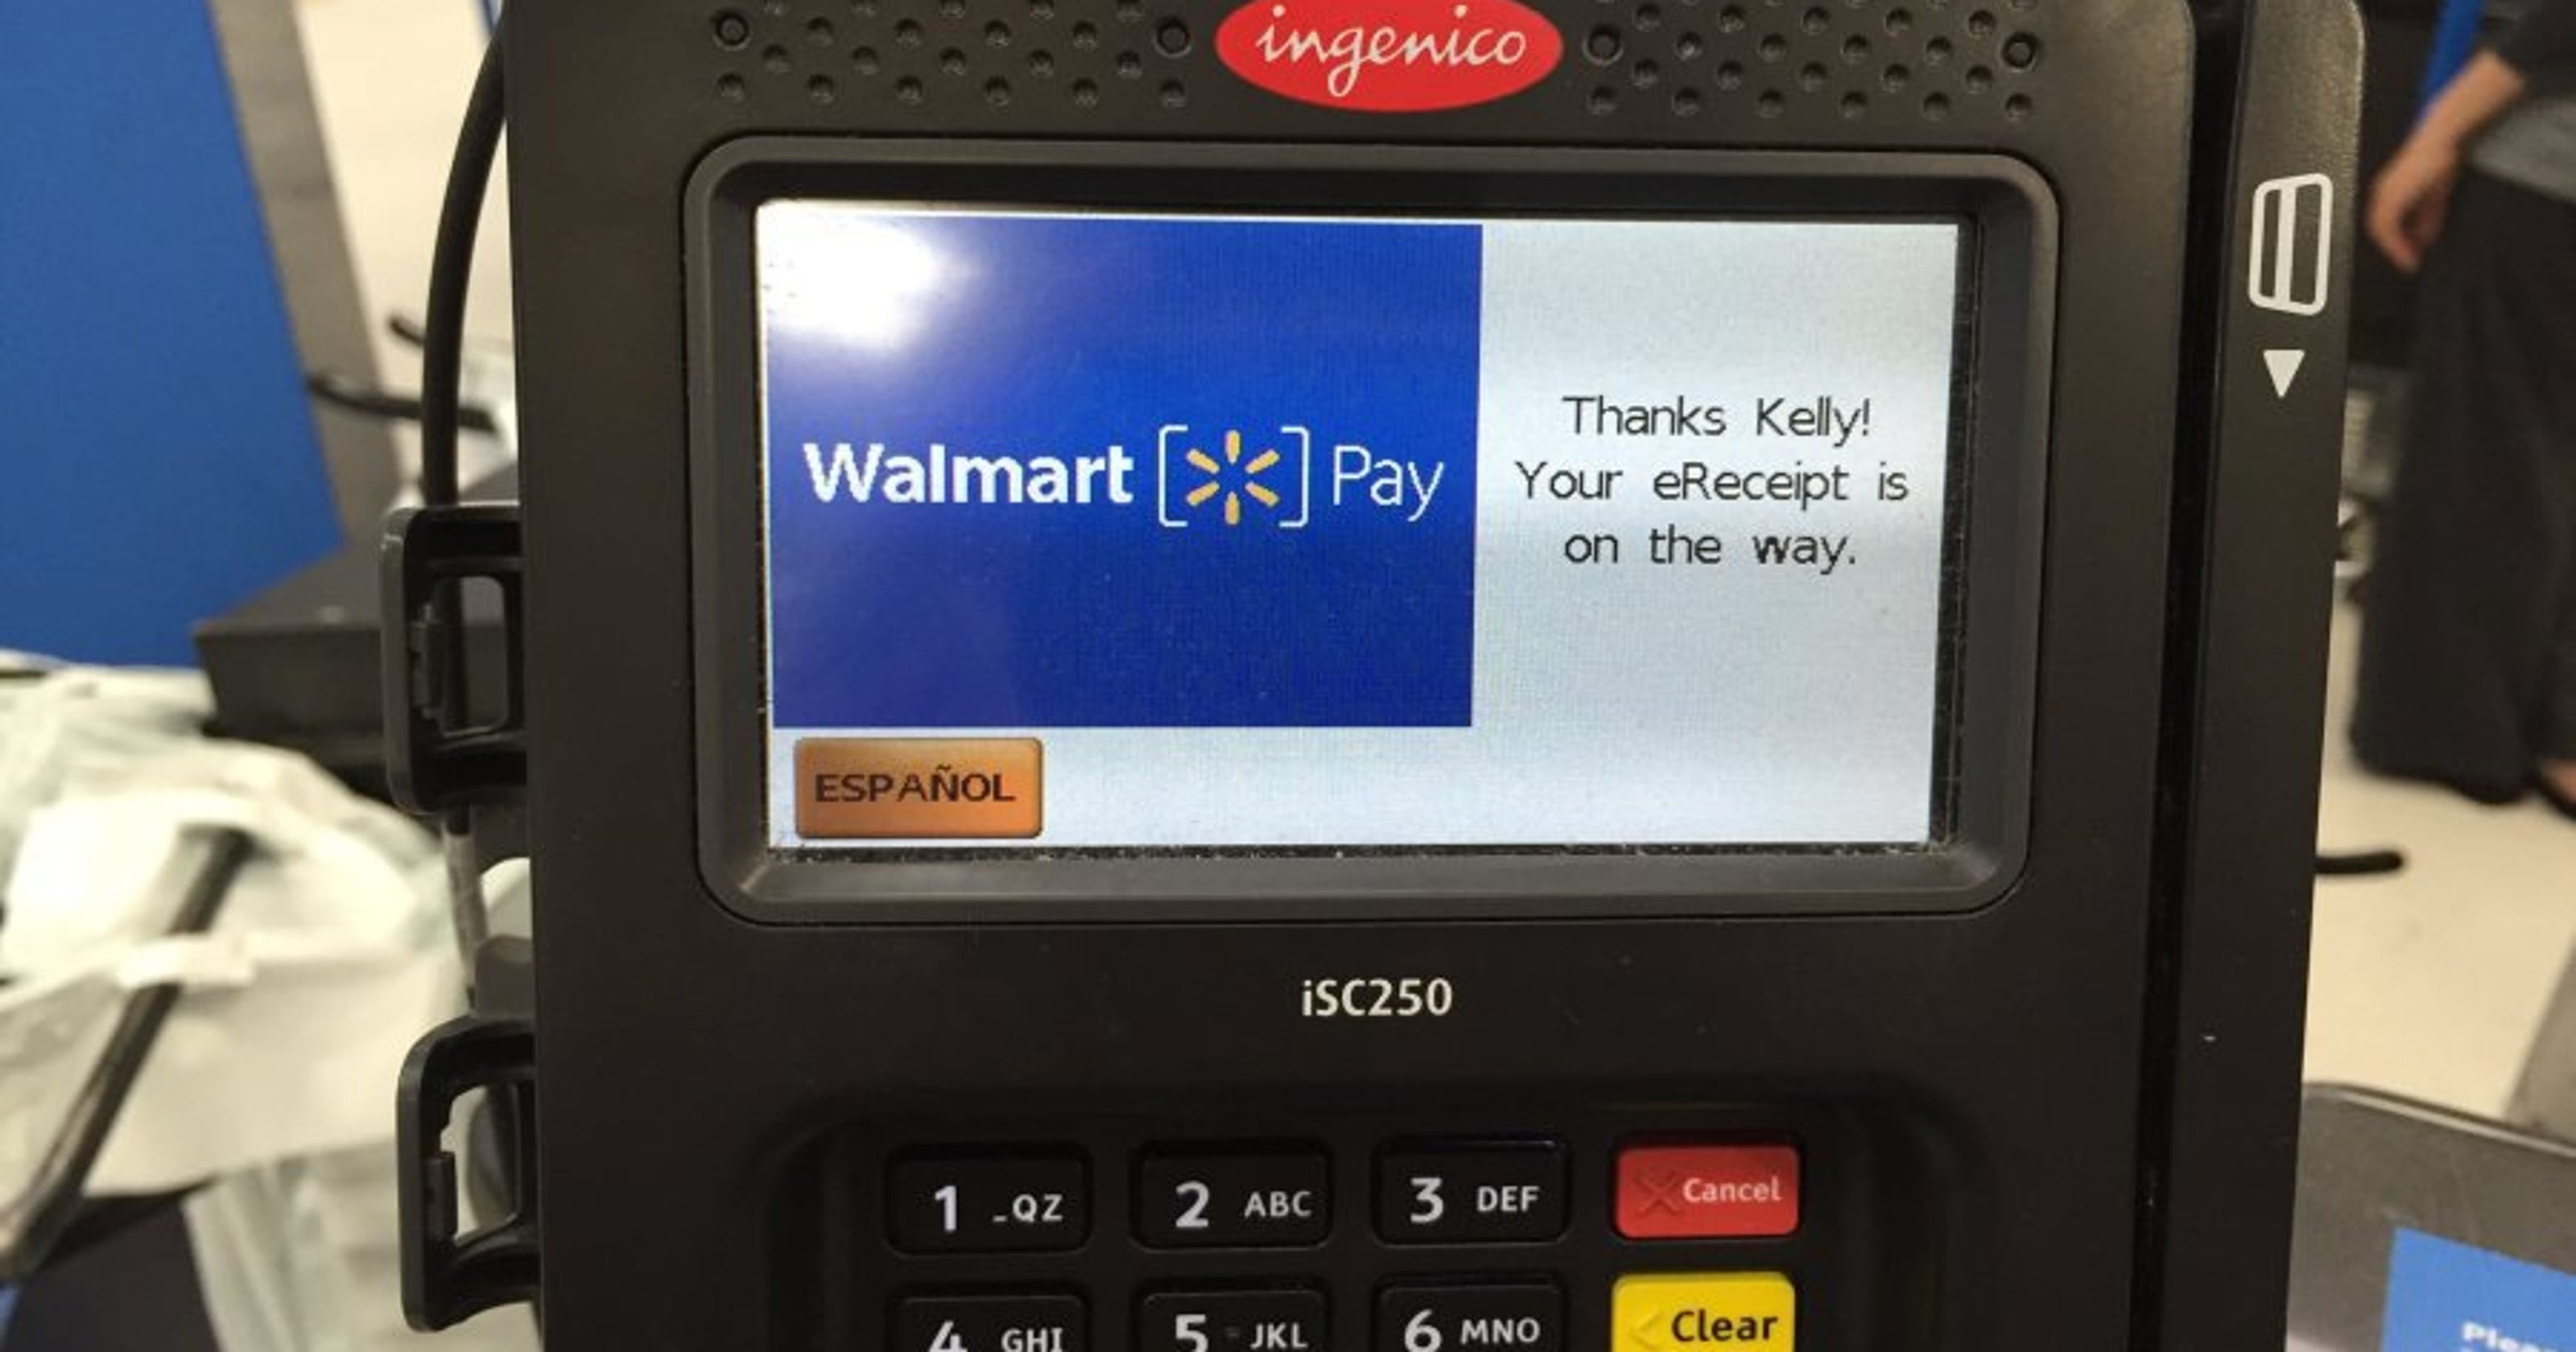 New way to pay at Walmart not without problems